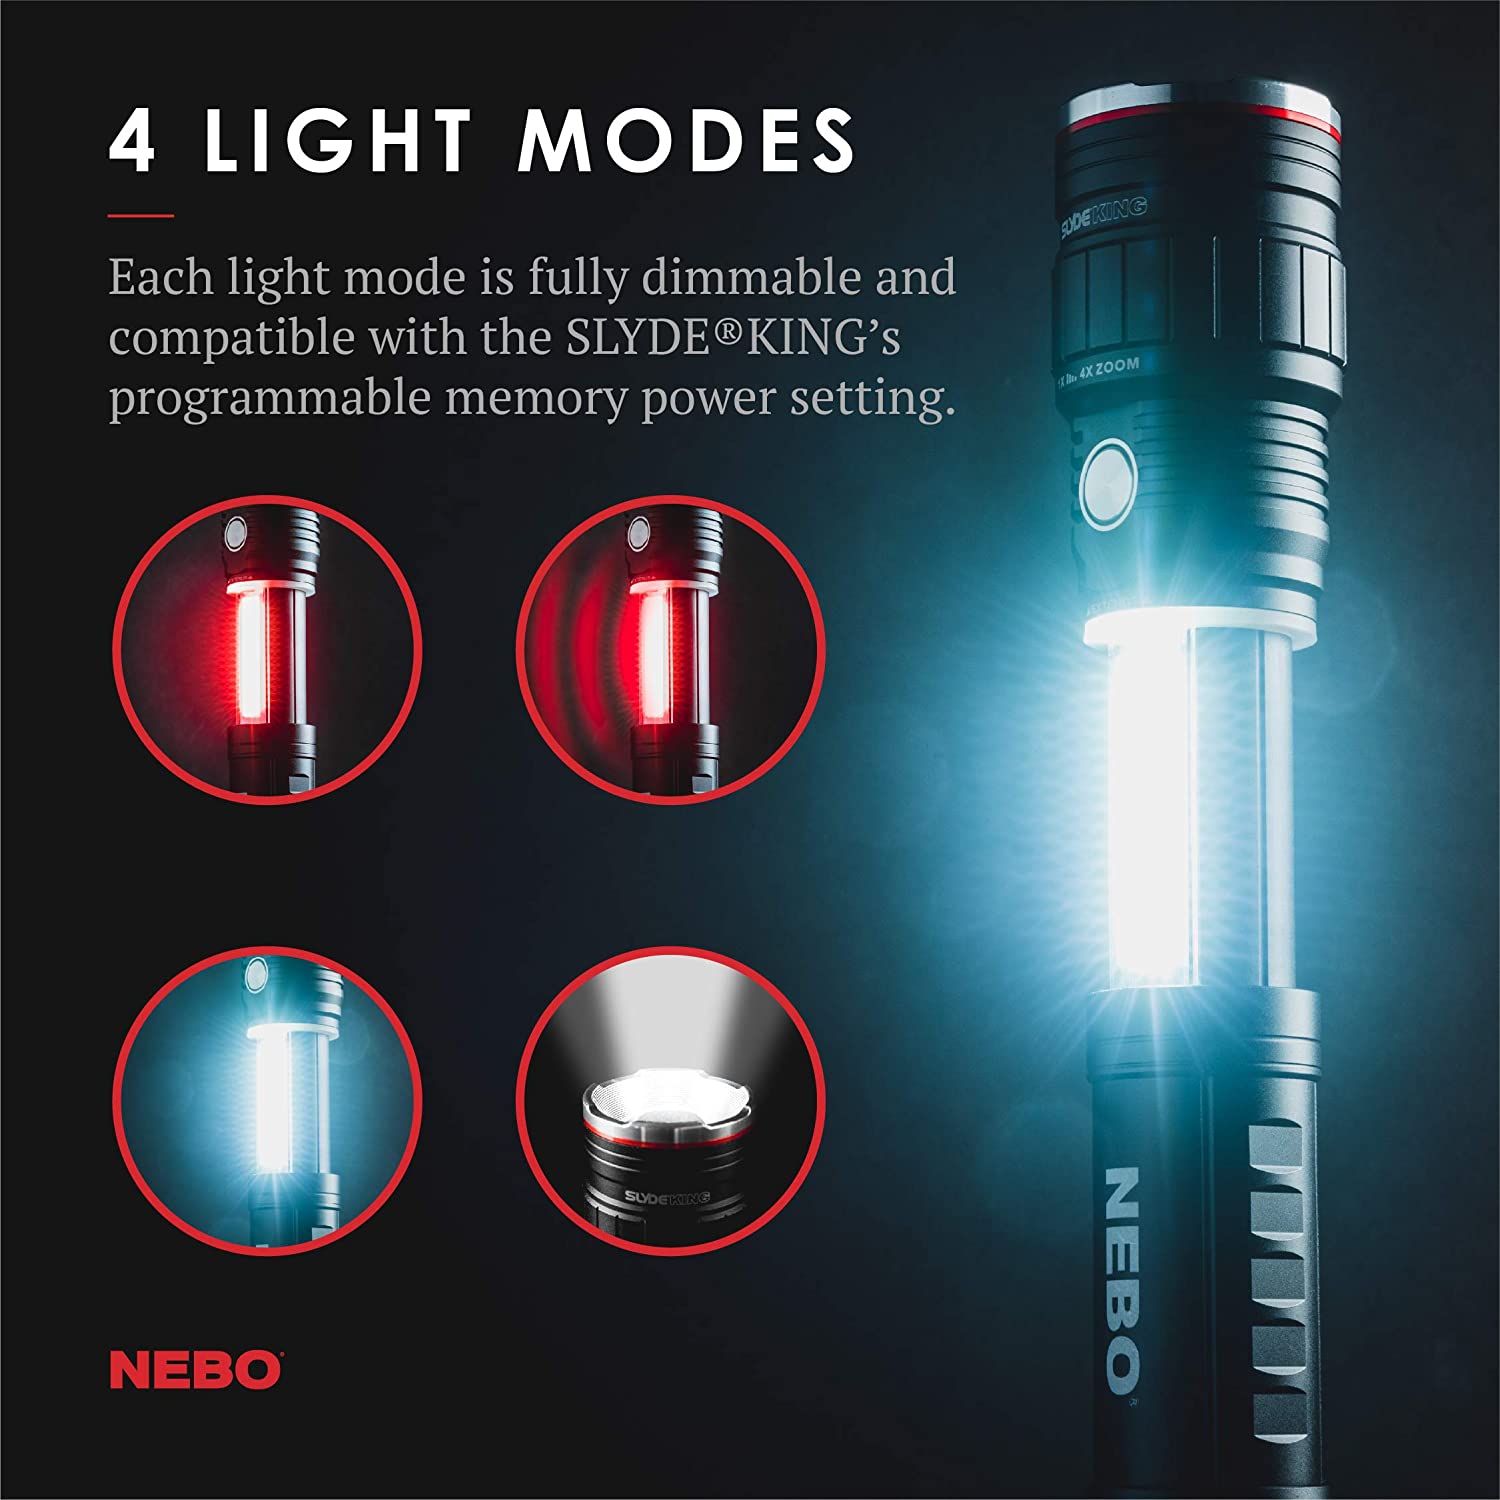 NEBO Slyde King Flashlight, Rechargeable LED Flashlight and Work Light, Bright, Durable, Everday Carry & Camping Flashlight with 4 Light Modes, C.O.B. Work Light and Magnetic Base - image 4 of 7